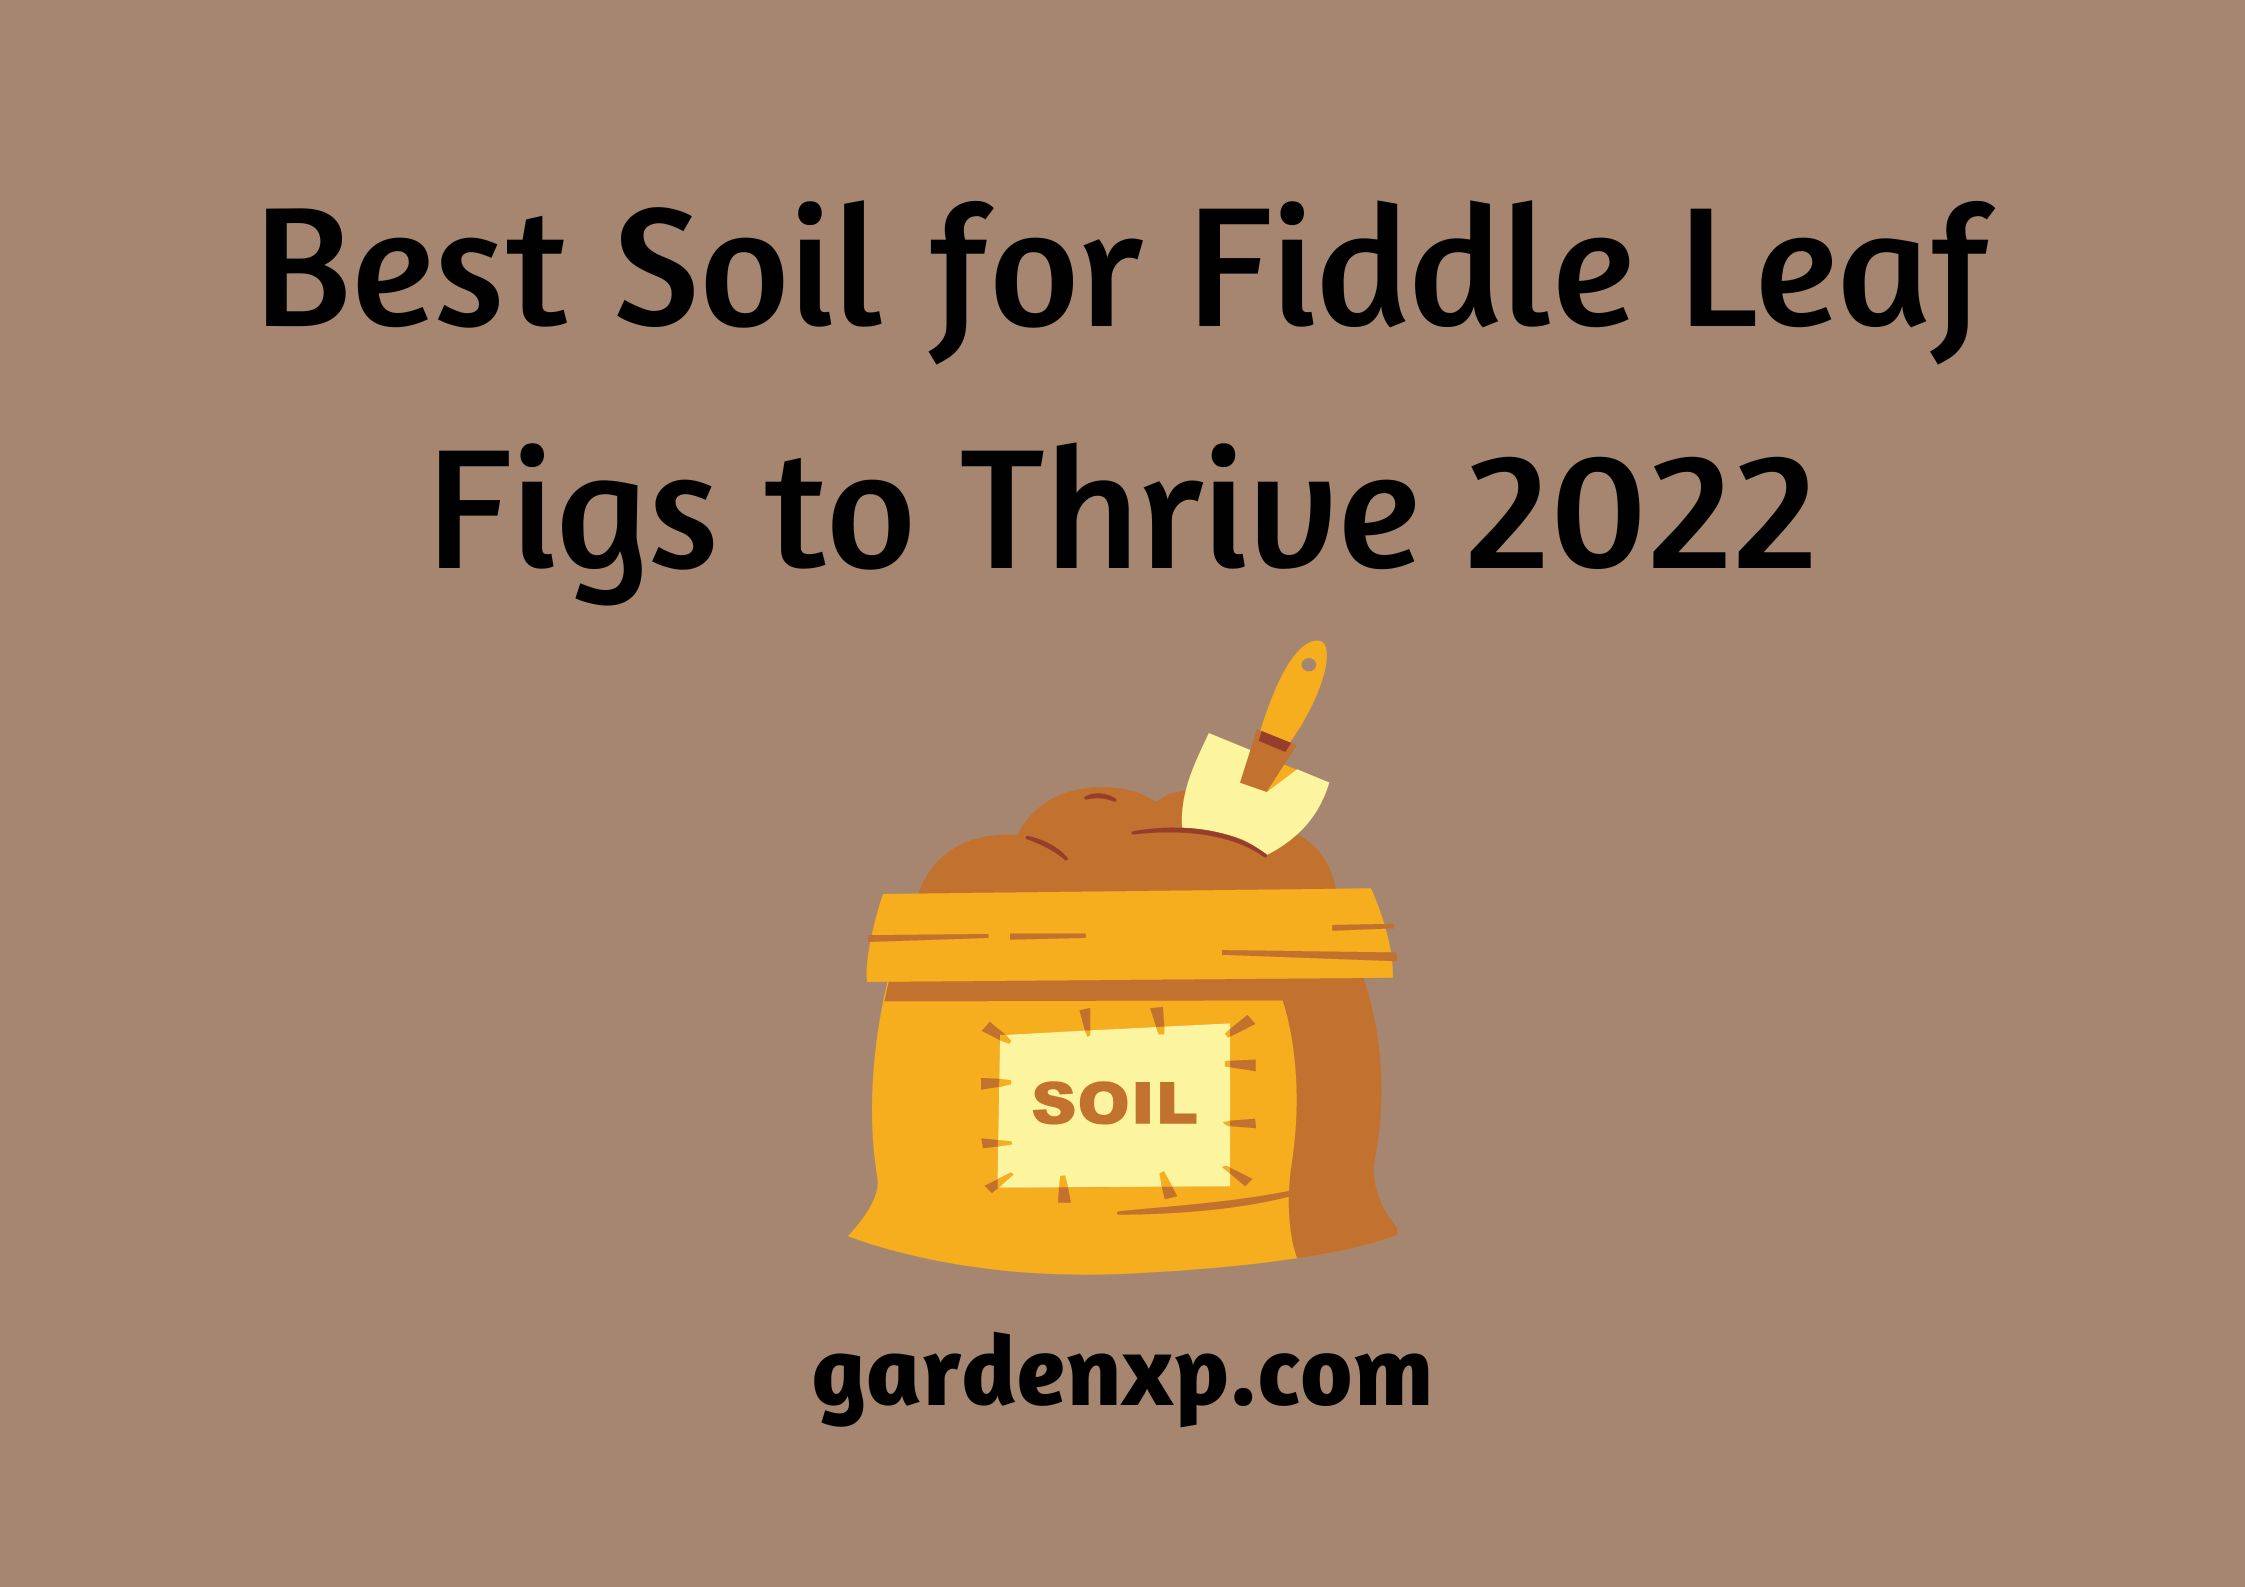 Best Soil for Fiddle Leaf Figs to Thrive 2022